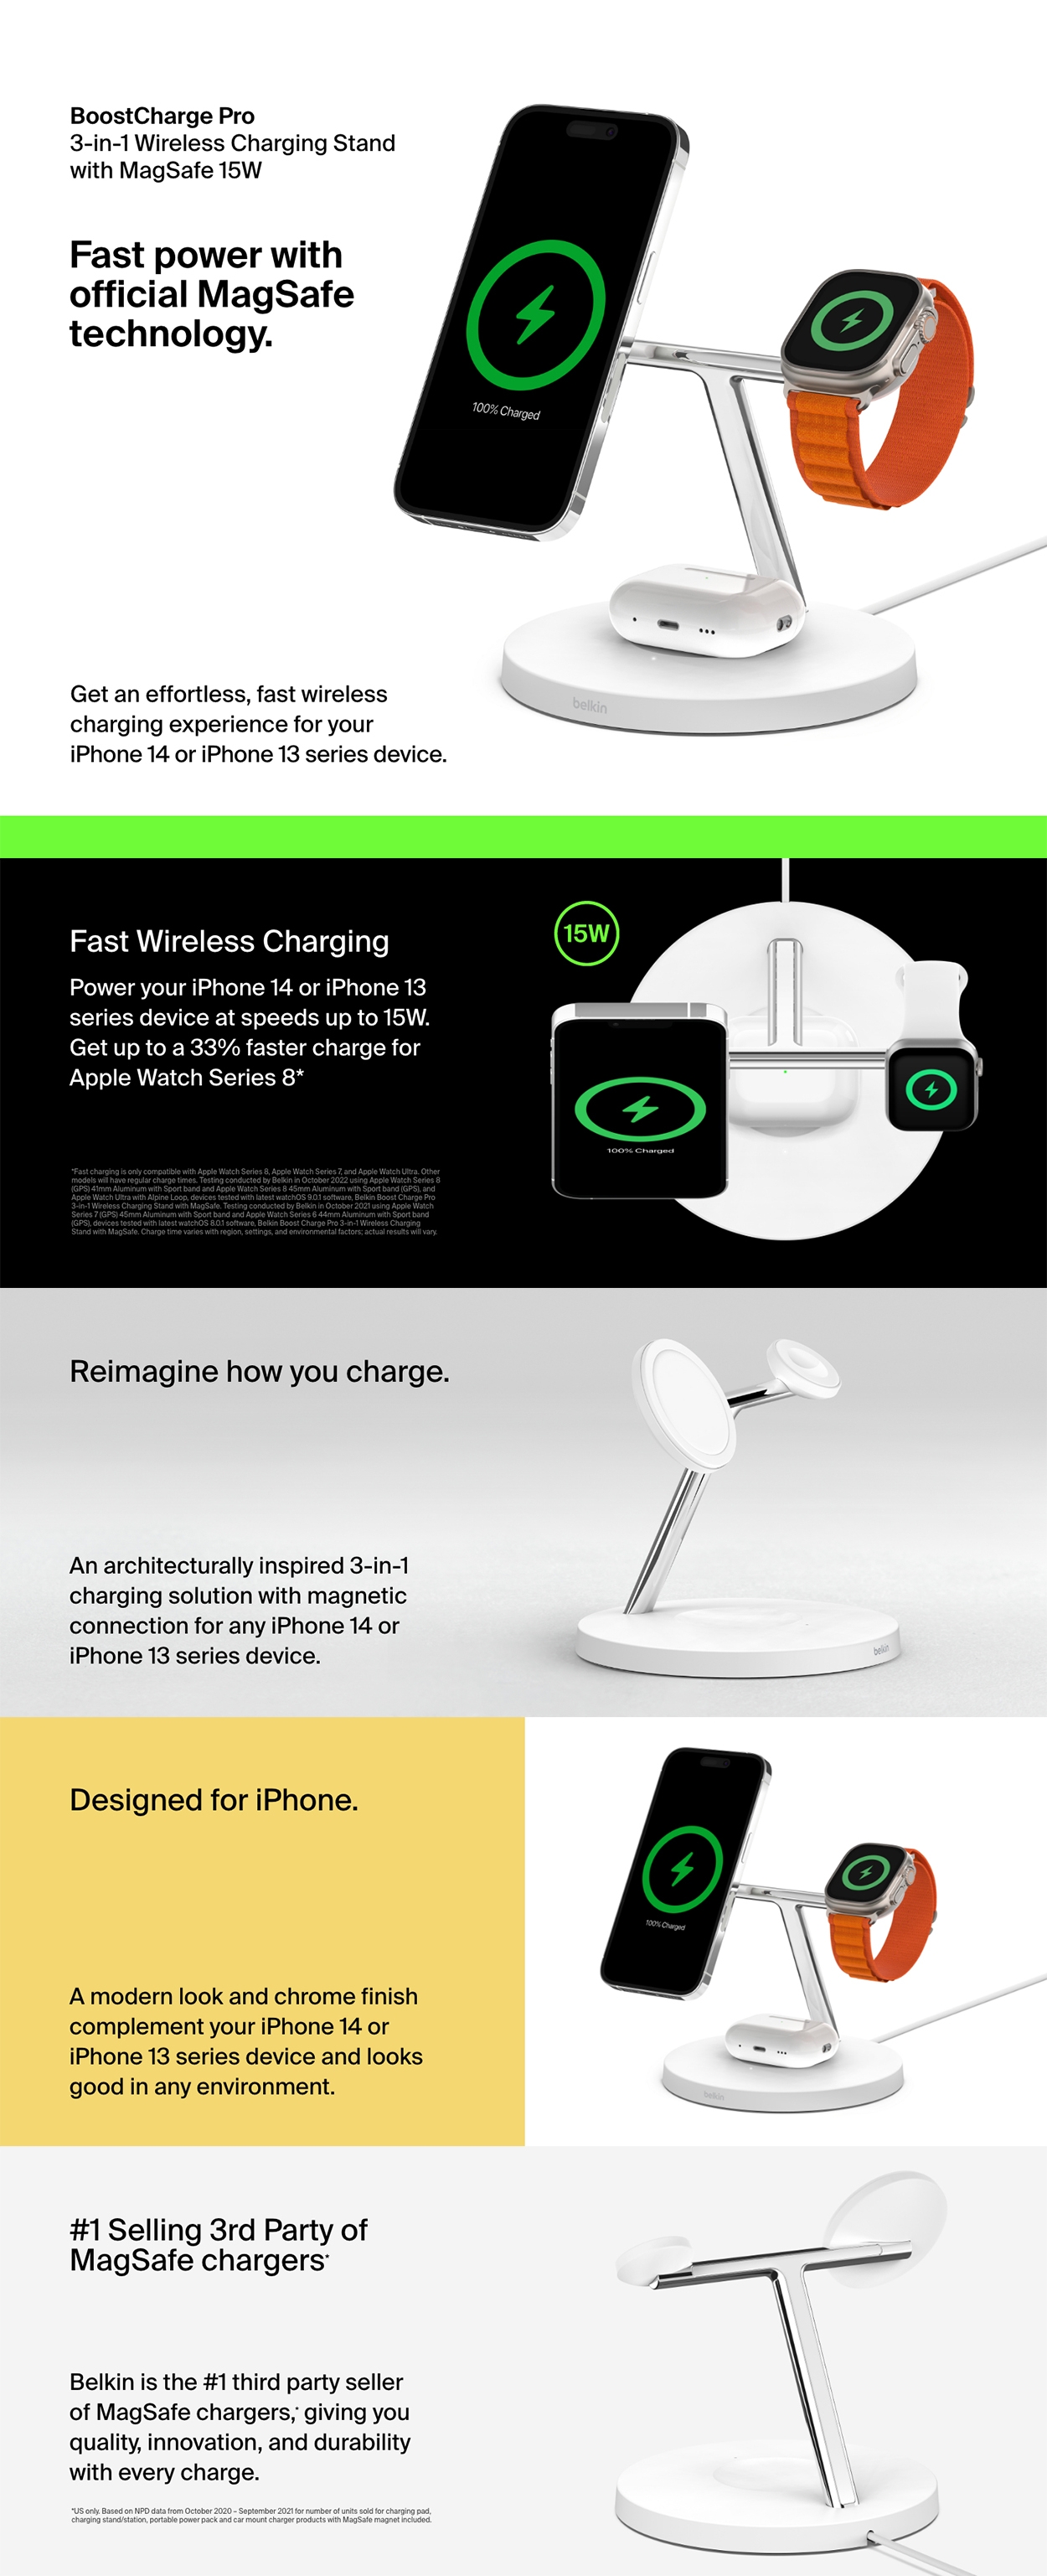 Belkin BoostCharge Pro 3 in 1 Wireless Charger with MagSafe 15W